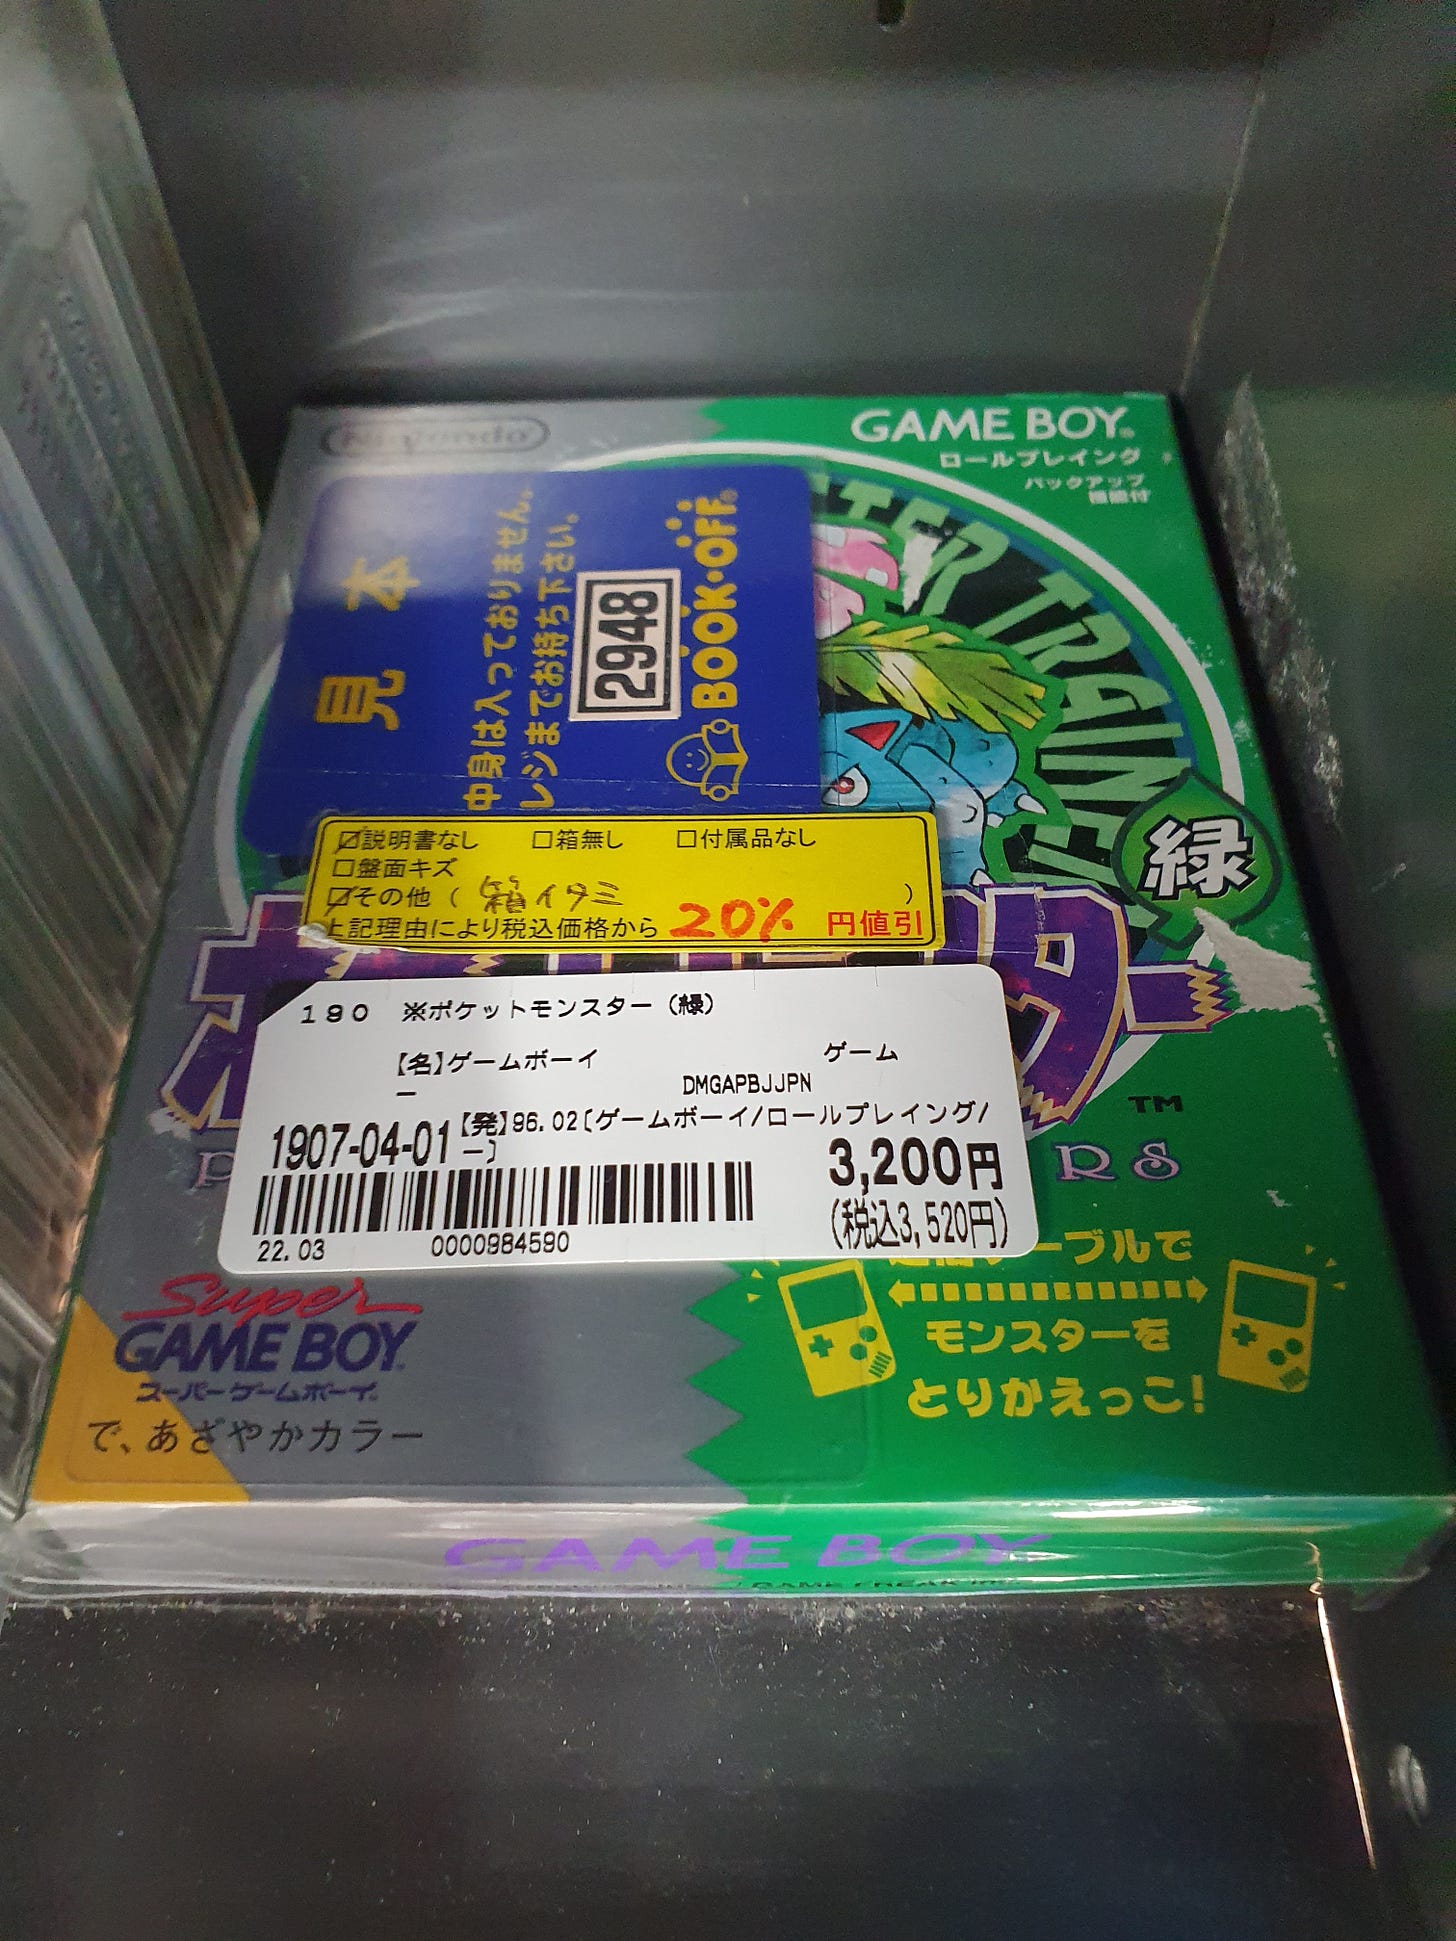 A boxed copy of Pokémon Green for Game Boy